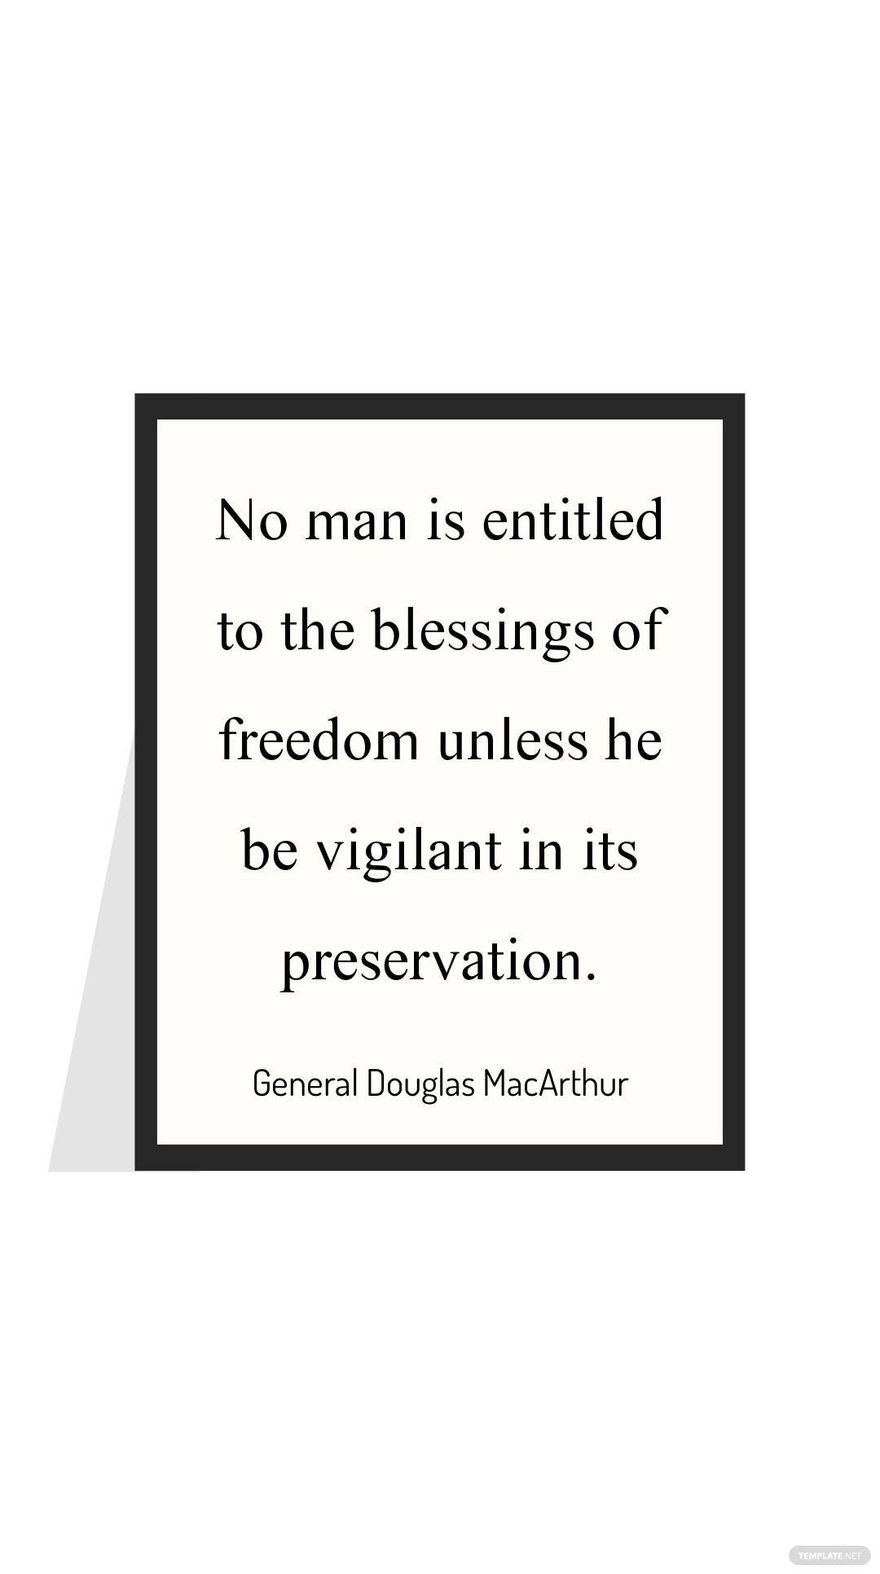 General Douglas MacArthur - No man is entitled to the blessings of freedom unless he be vigilant in its preservation. Template